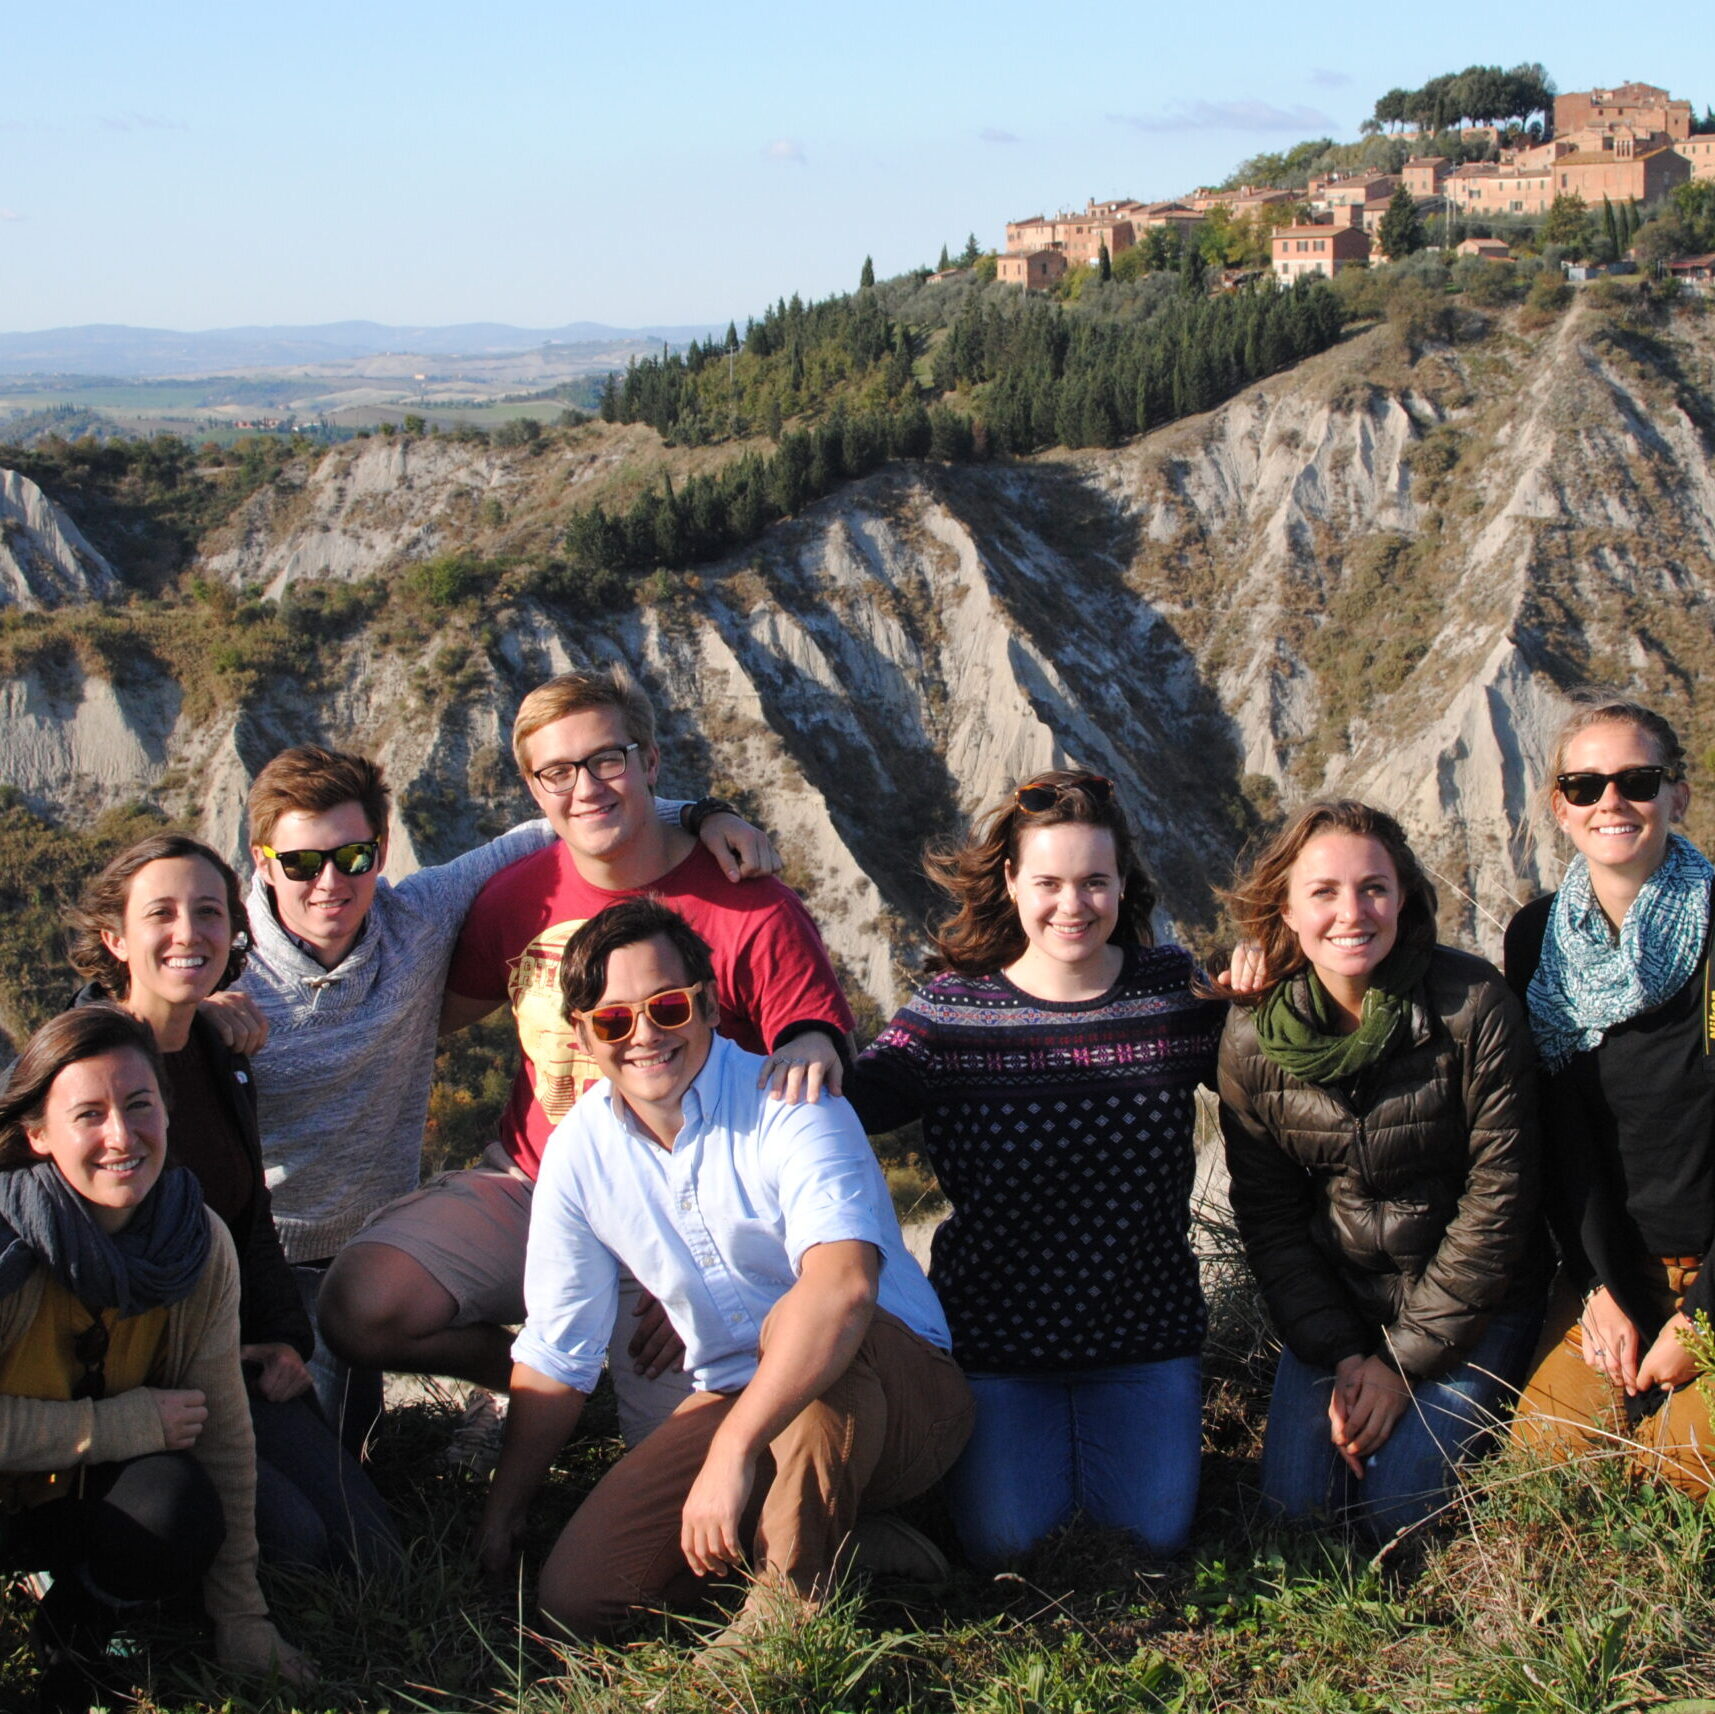 A group of interns kneeling together in a group, smiling at the camera. They are on a field trip and an old city on a mountain is in the background.